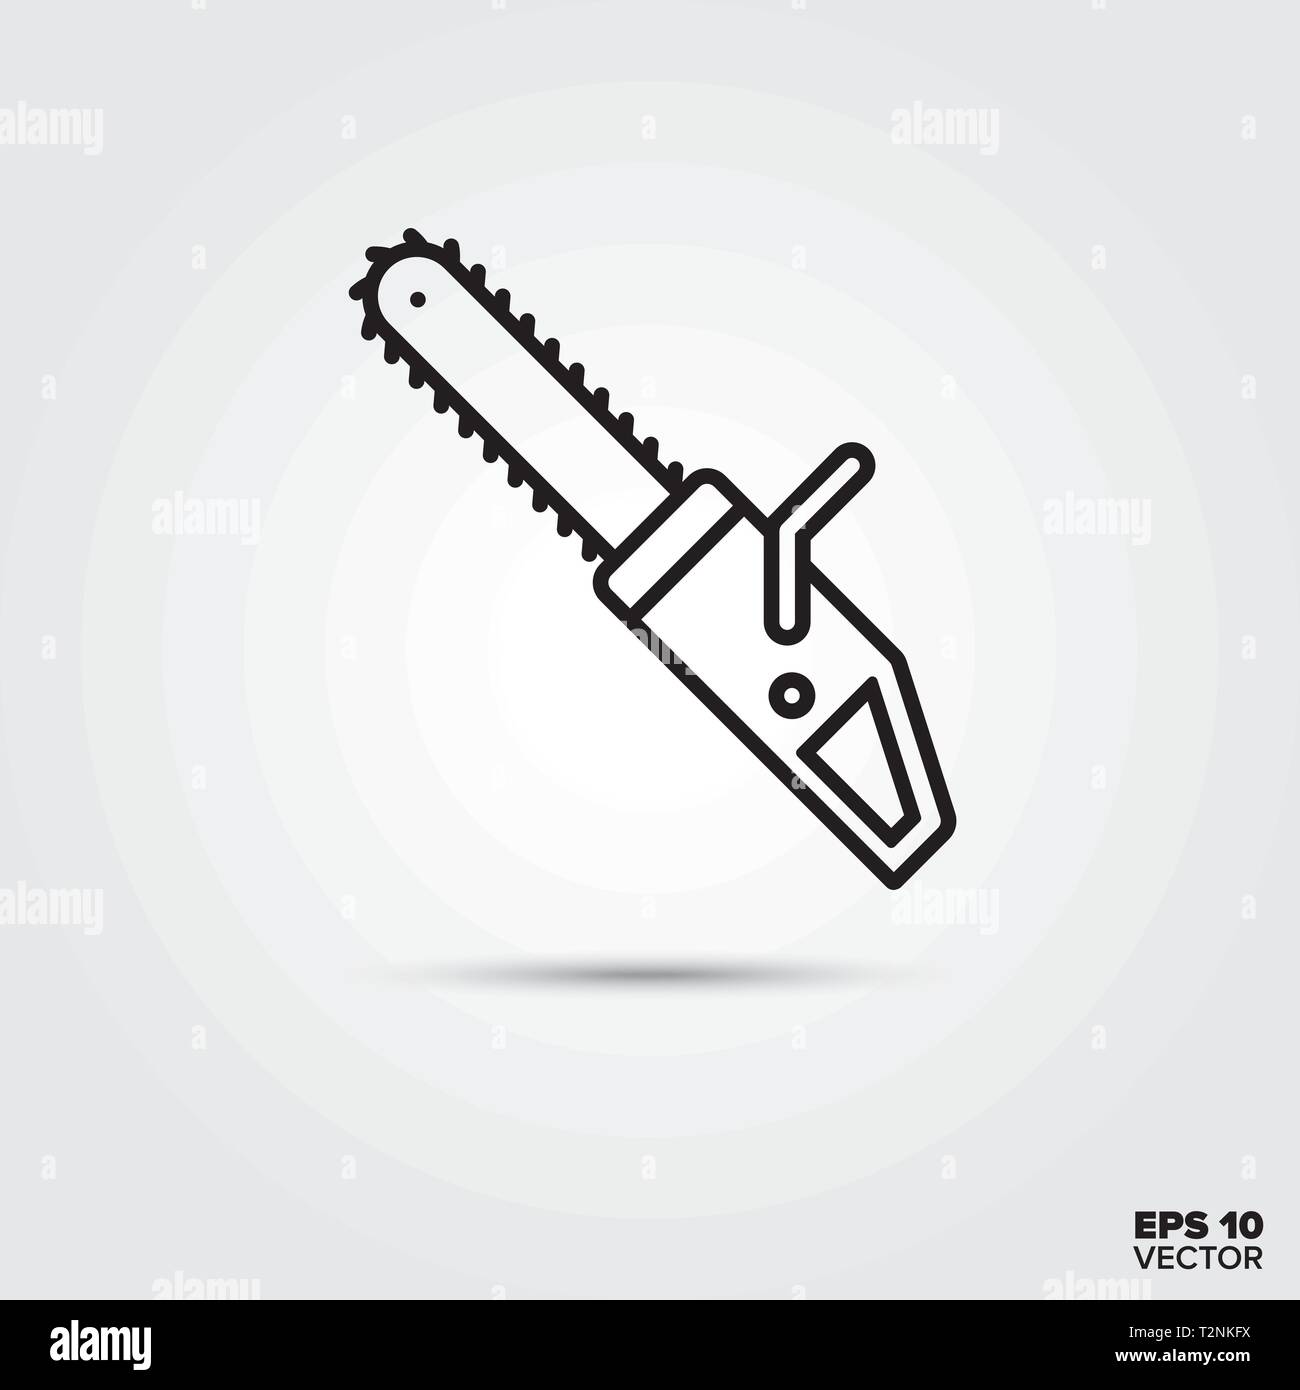 Chainsaw line icon. EPS 10 vector symbol. Stock Vector